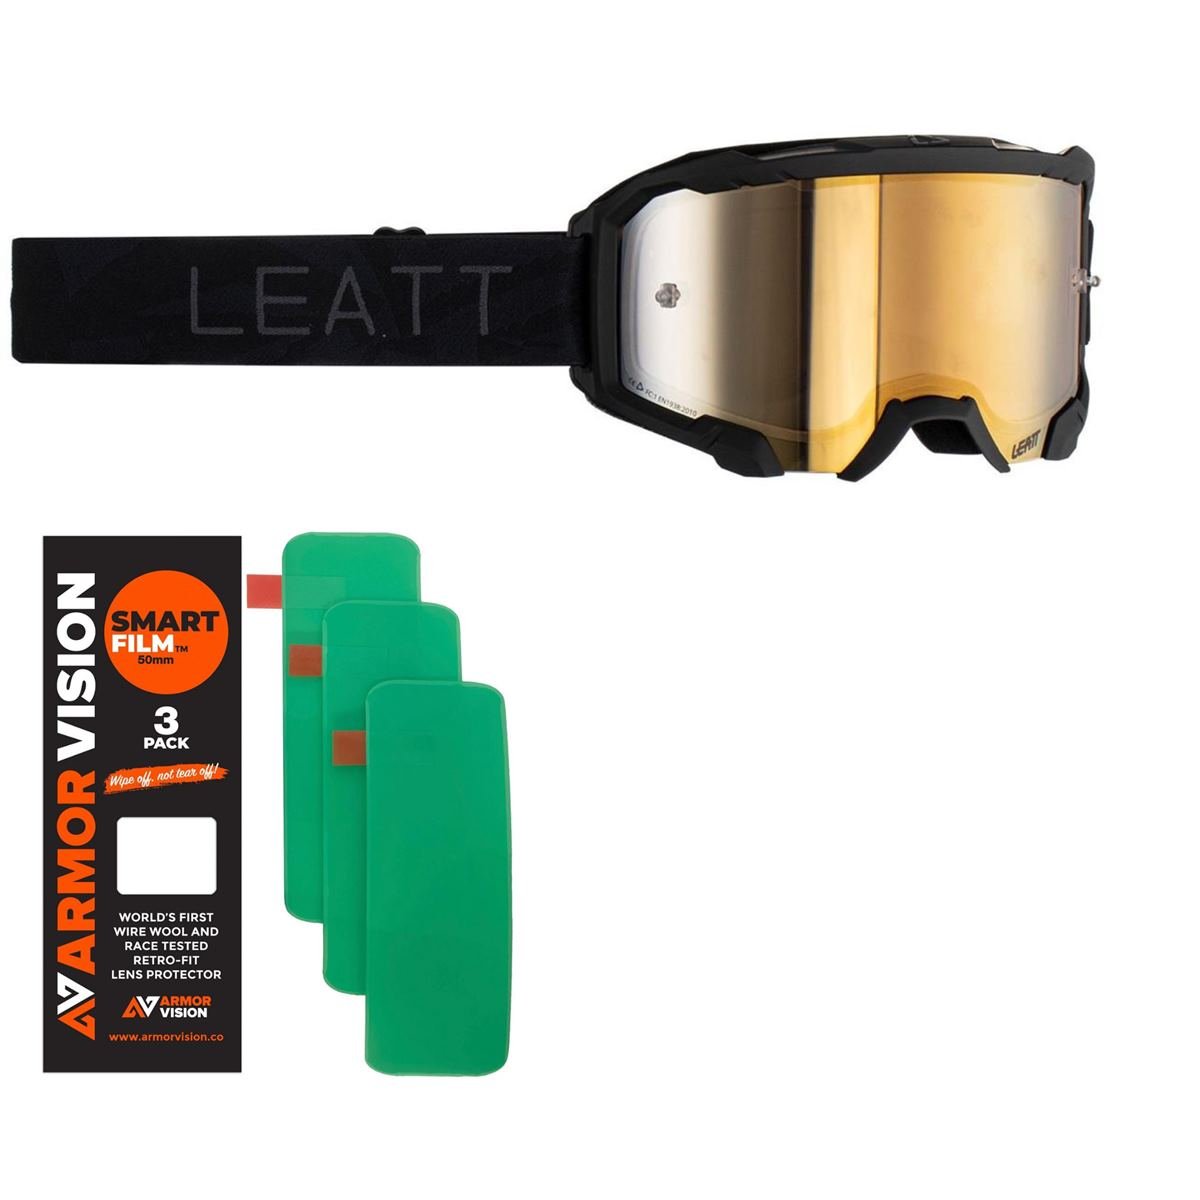 Leatt Goggle Velocity 4.5 Set: 2 pieces, Stealth + Smart Film Lens Protector